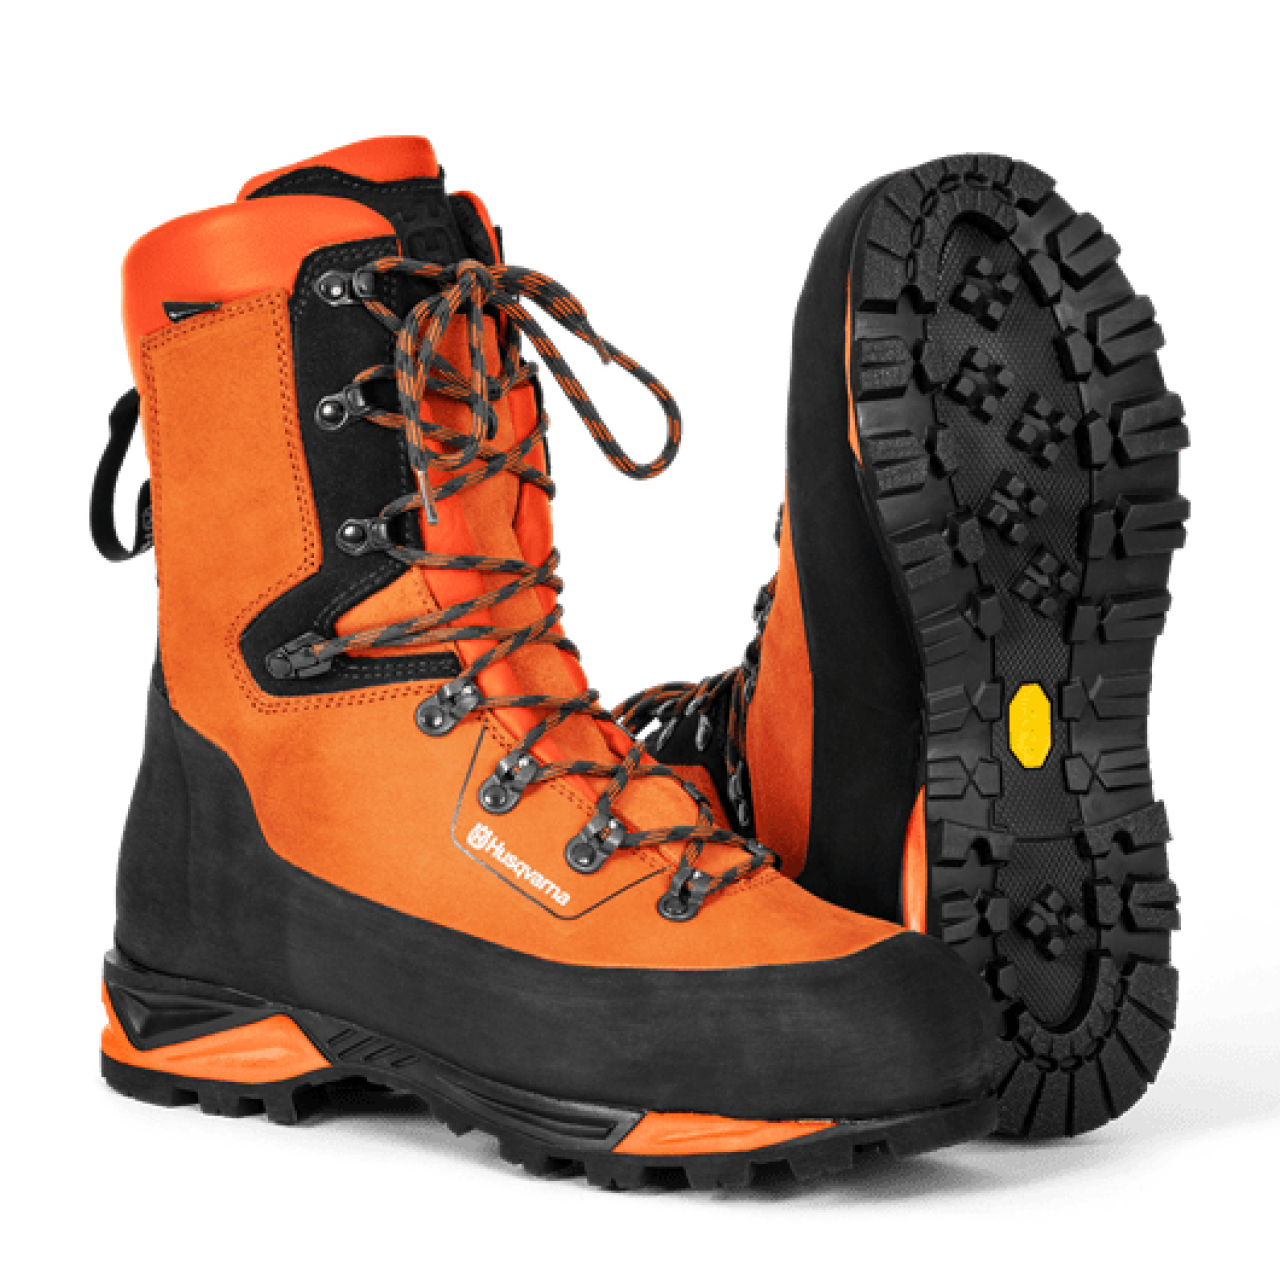 Stiefel Technical 24 Level 2 Gr. 40